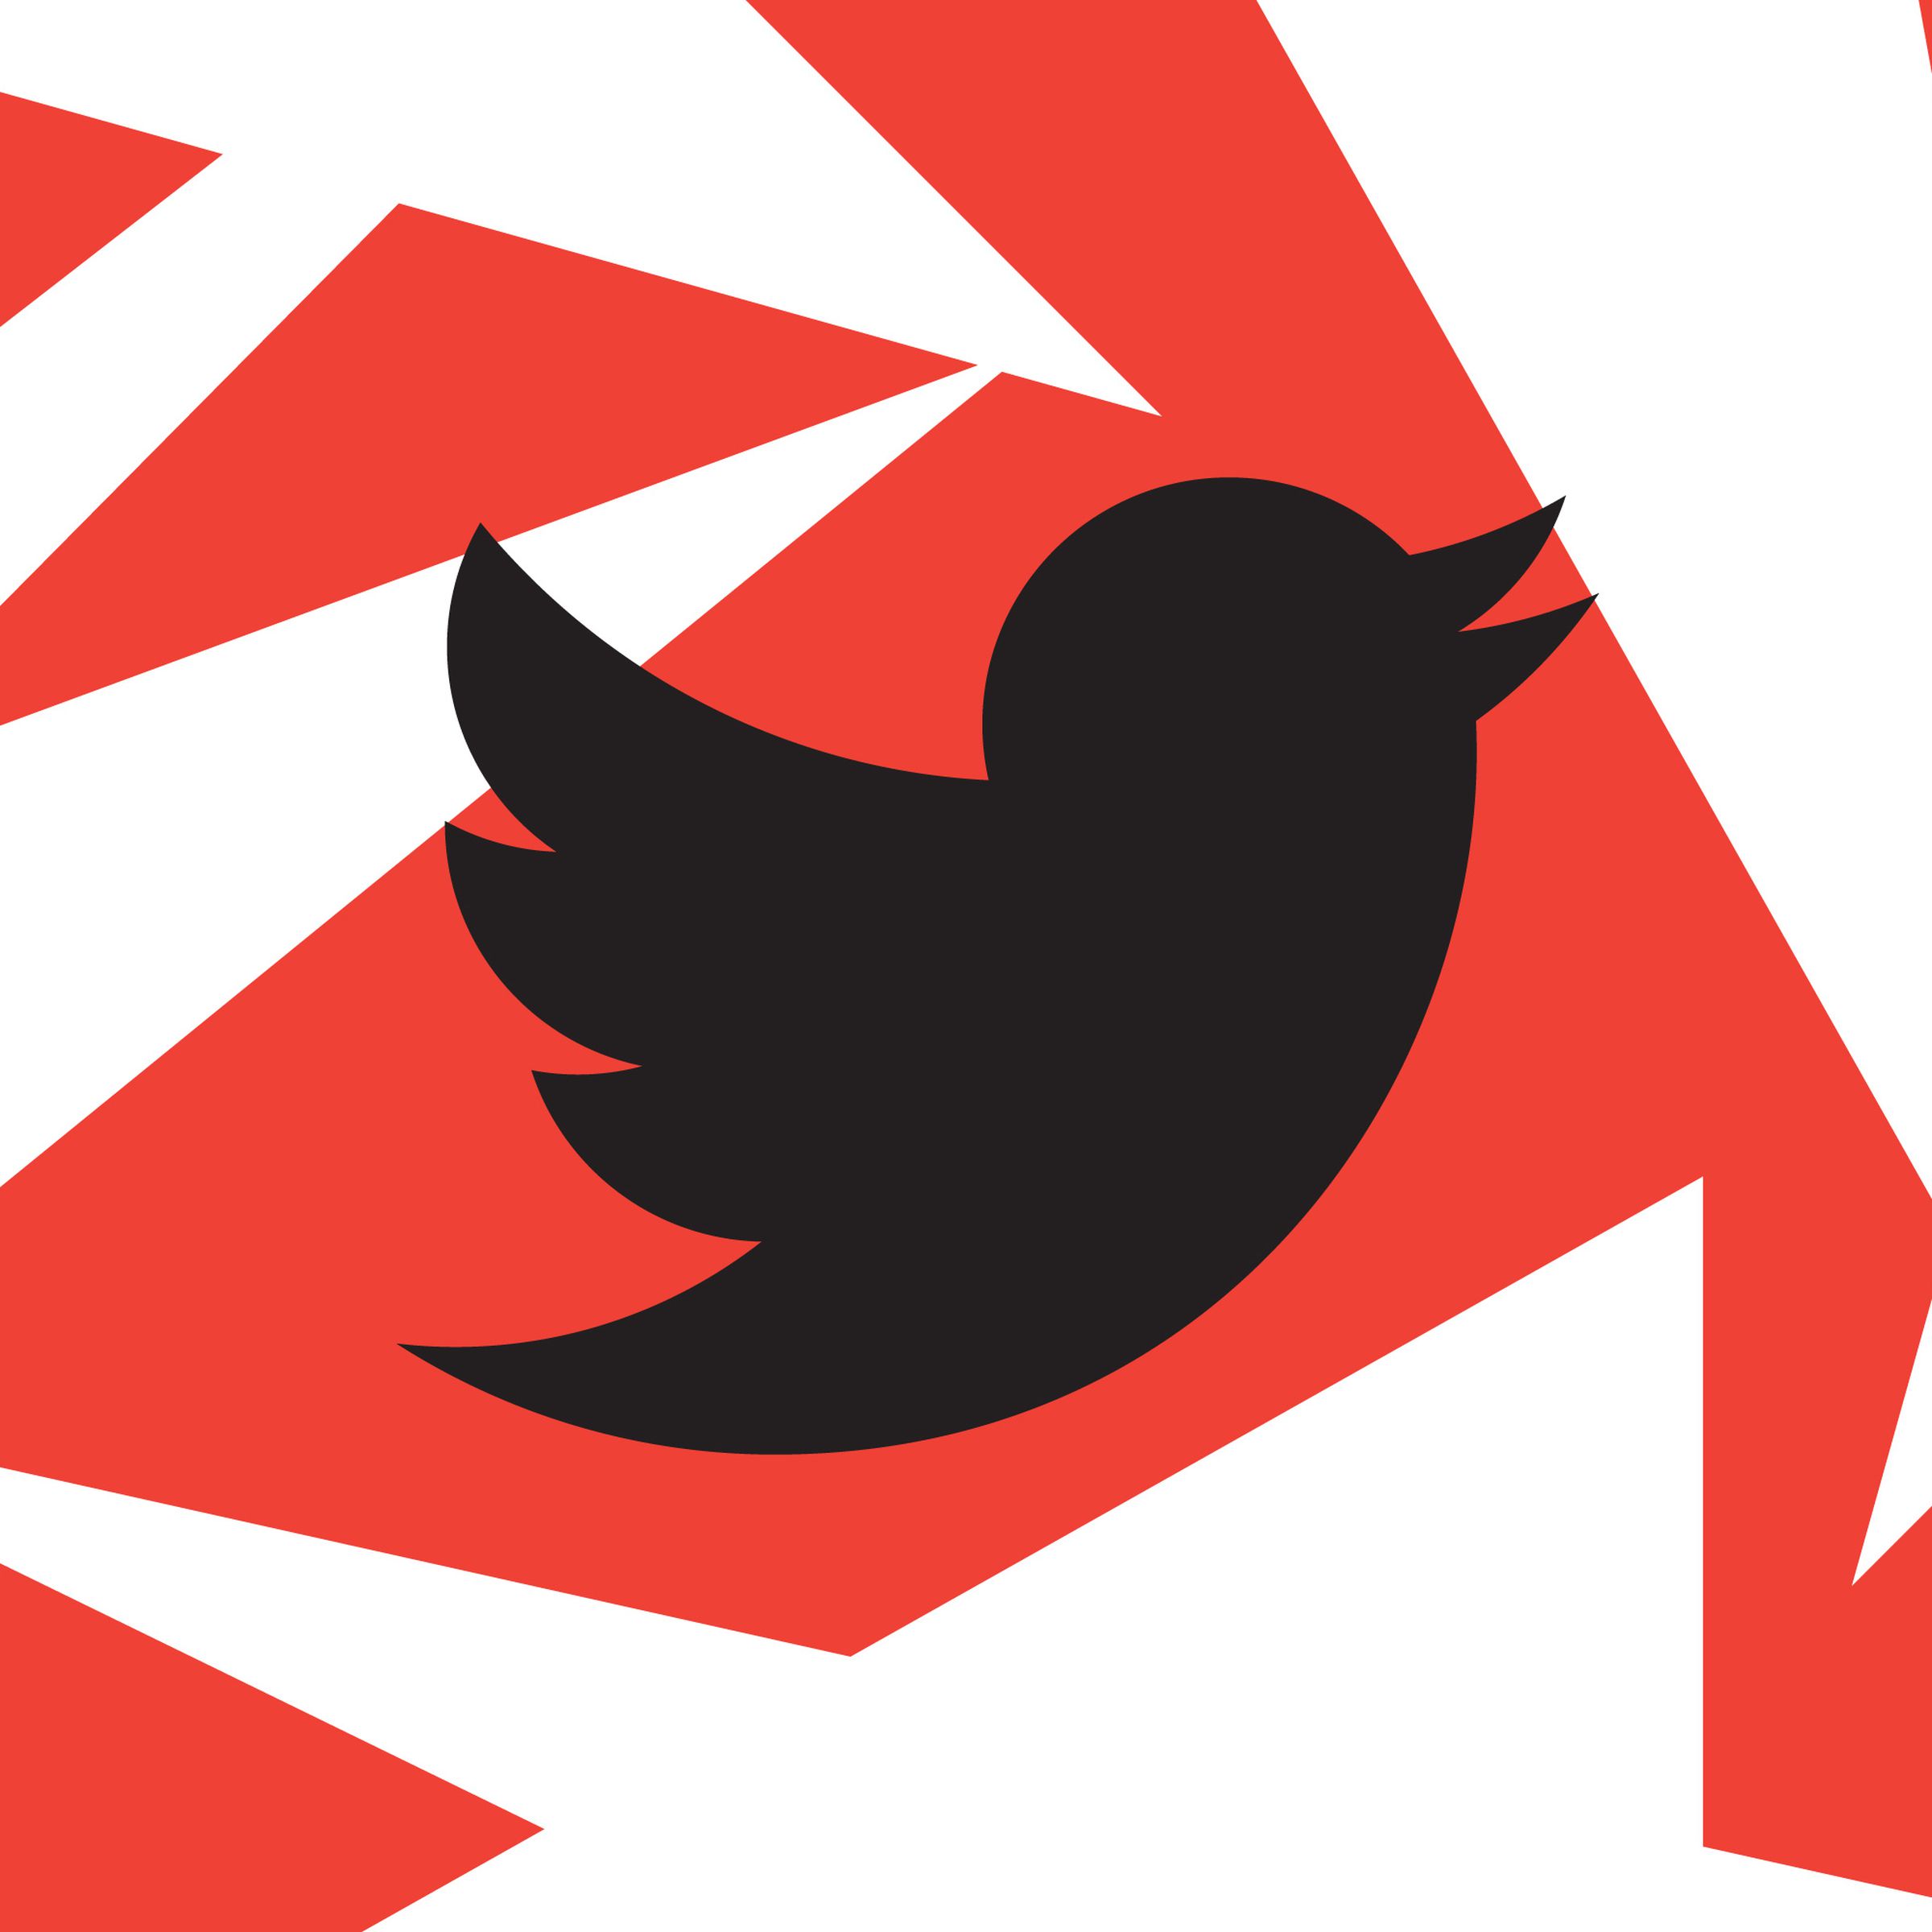 A black Twitter logo over a red and white background